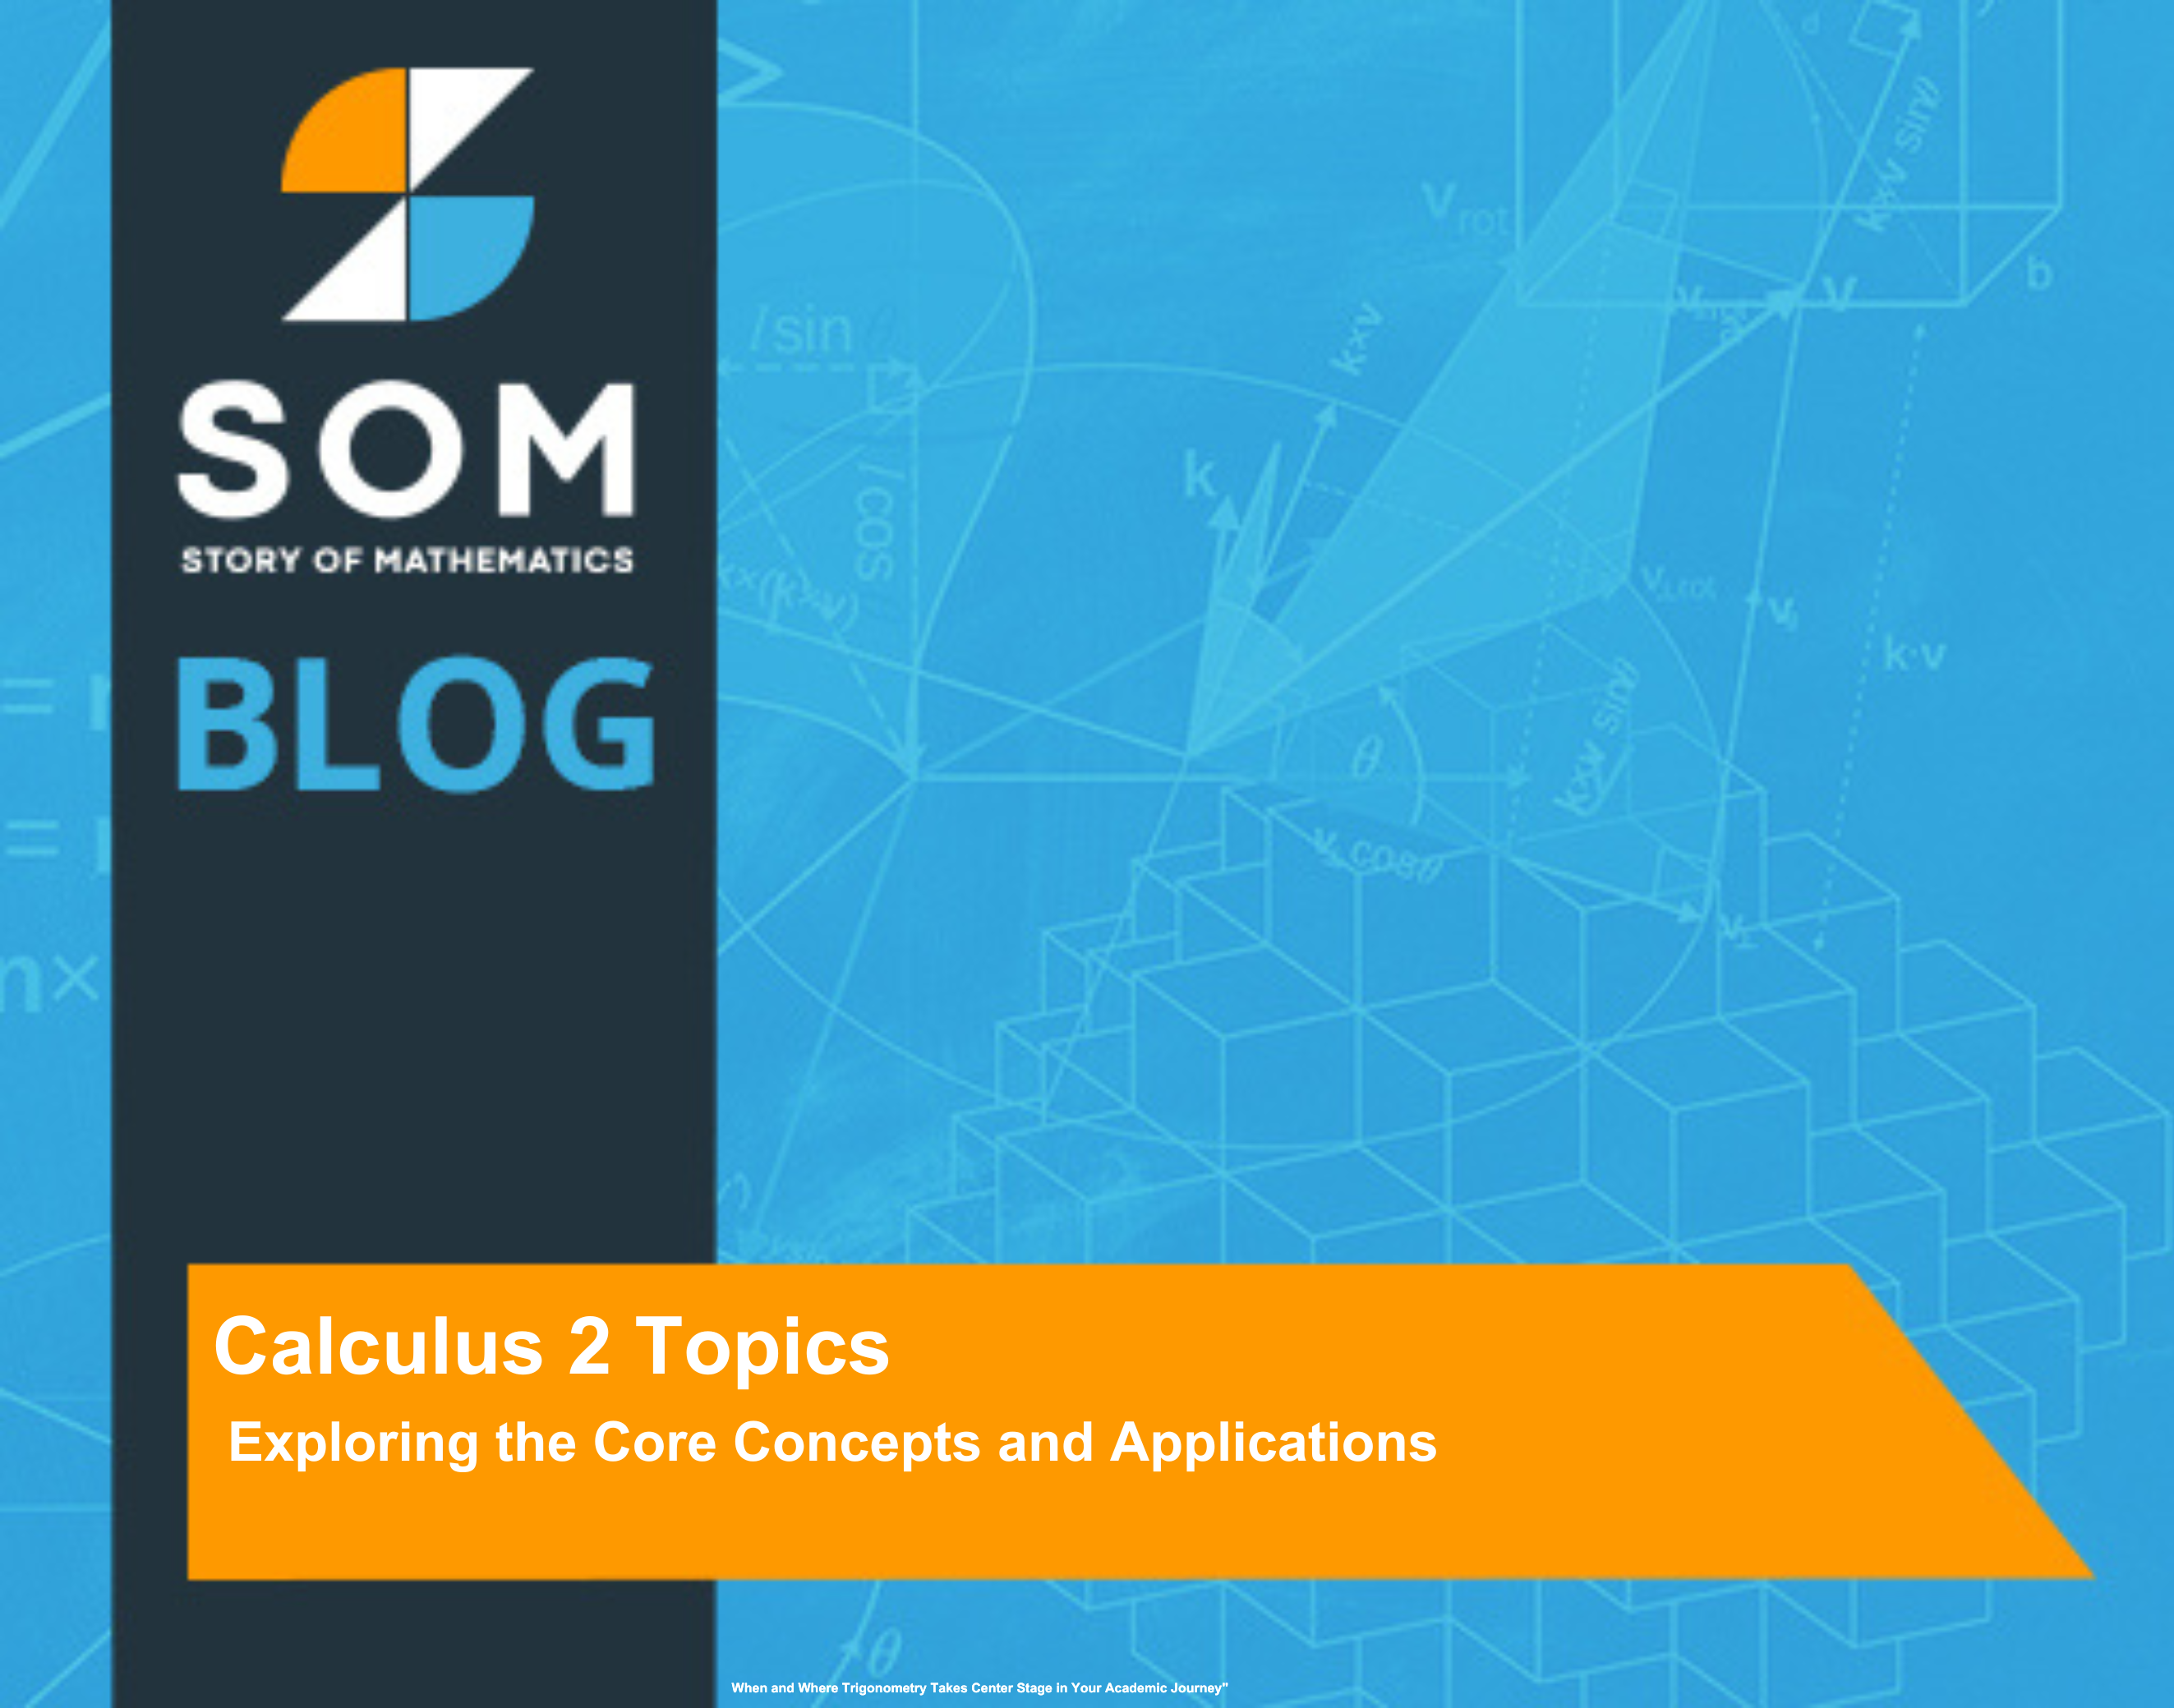 Feature Image Calculus 2 Topics Exploring the Core Concepts and Applications